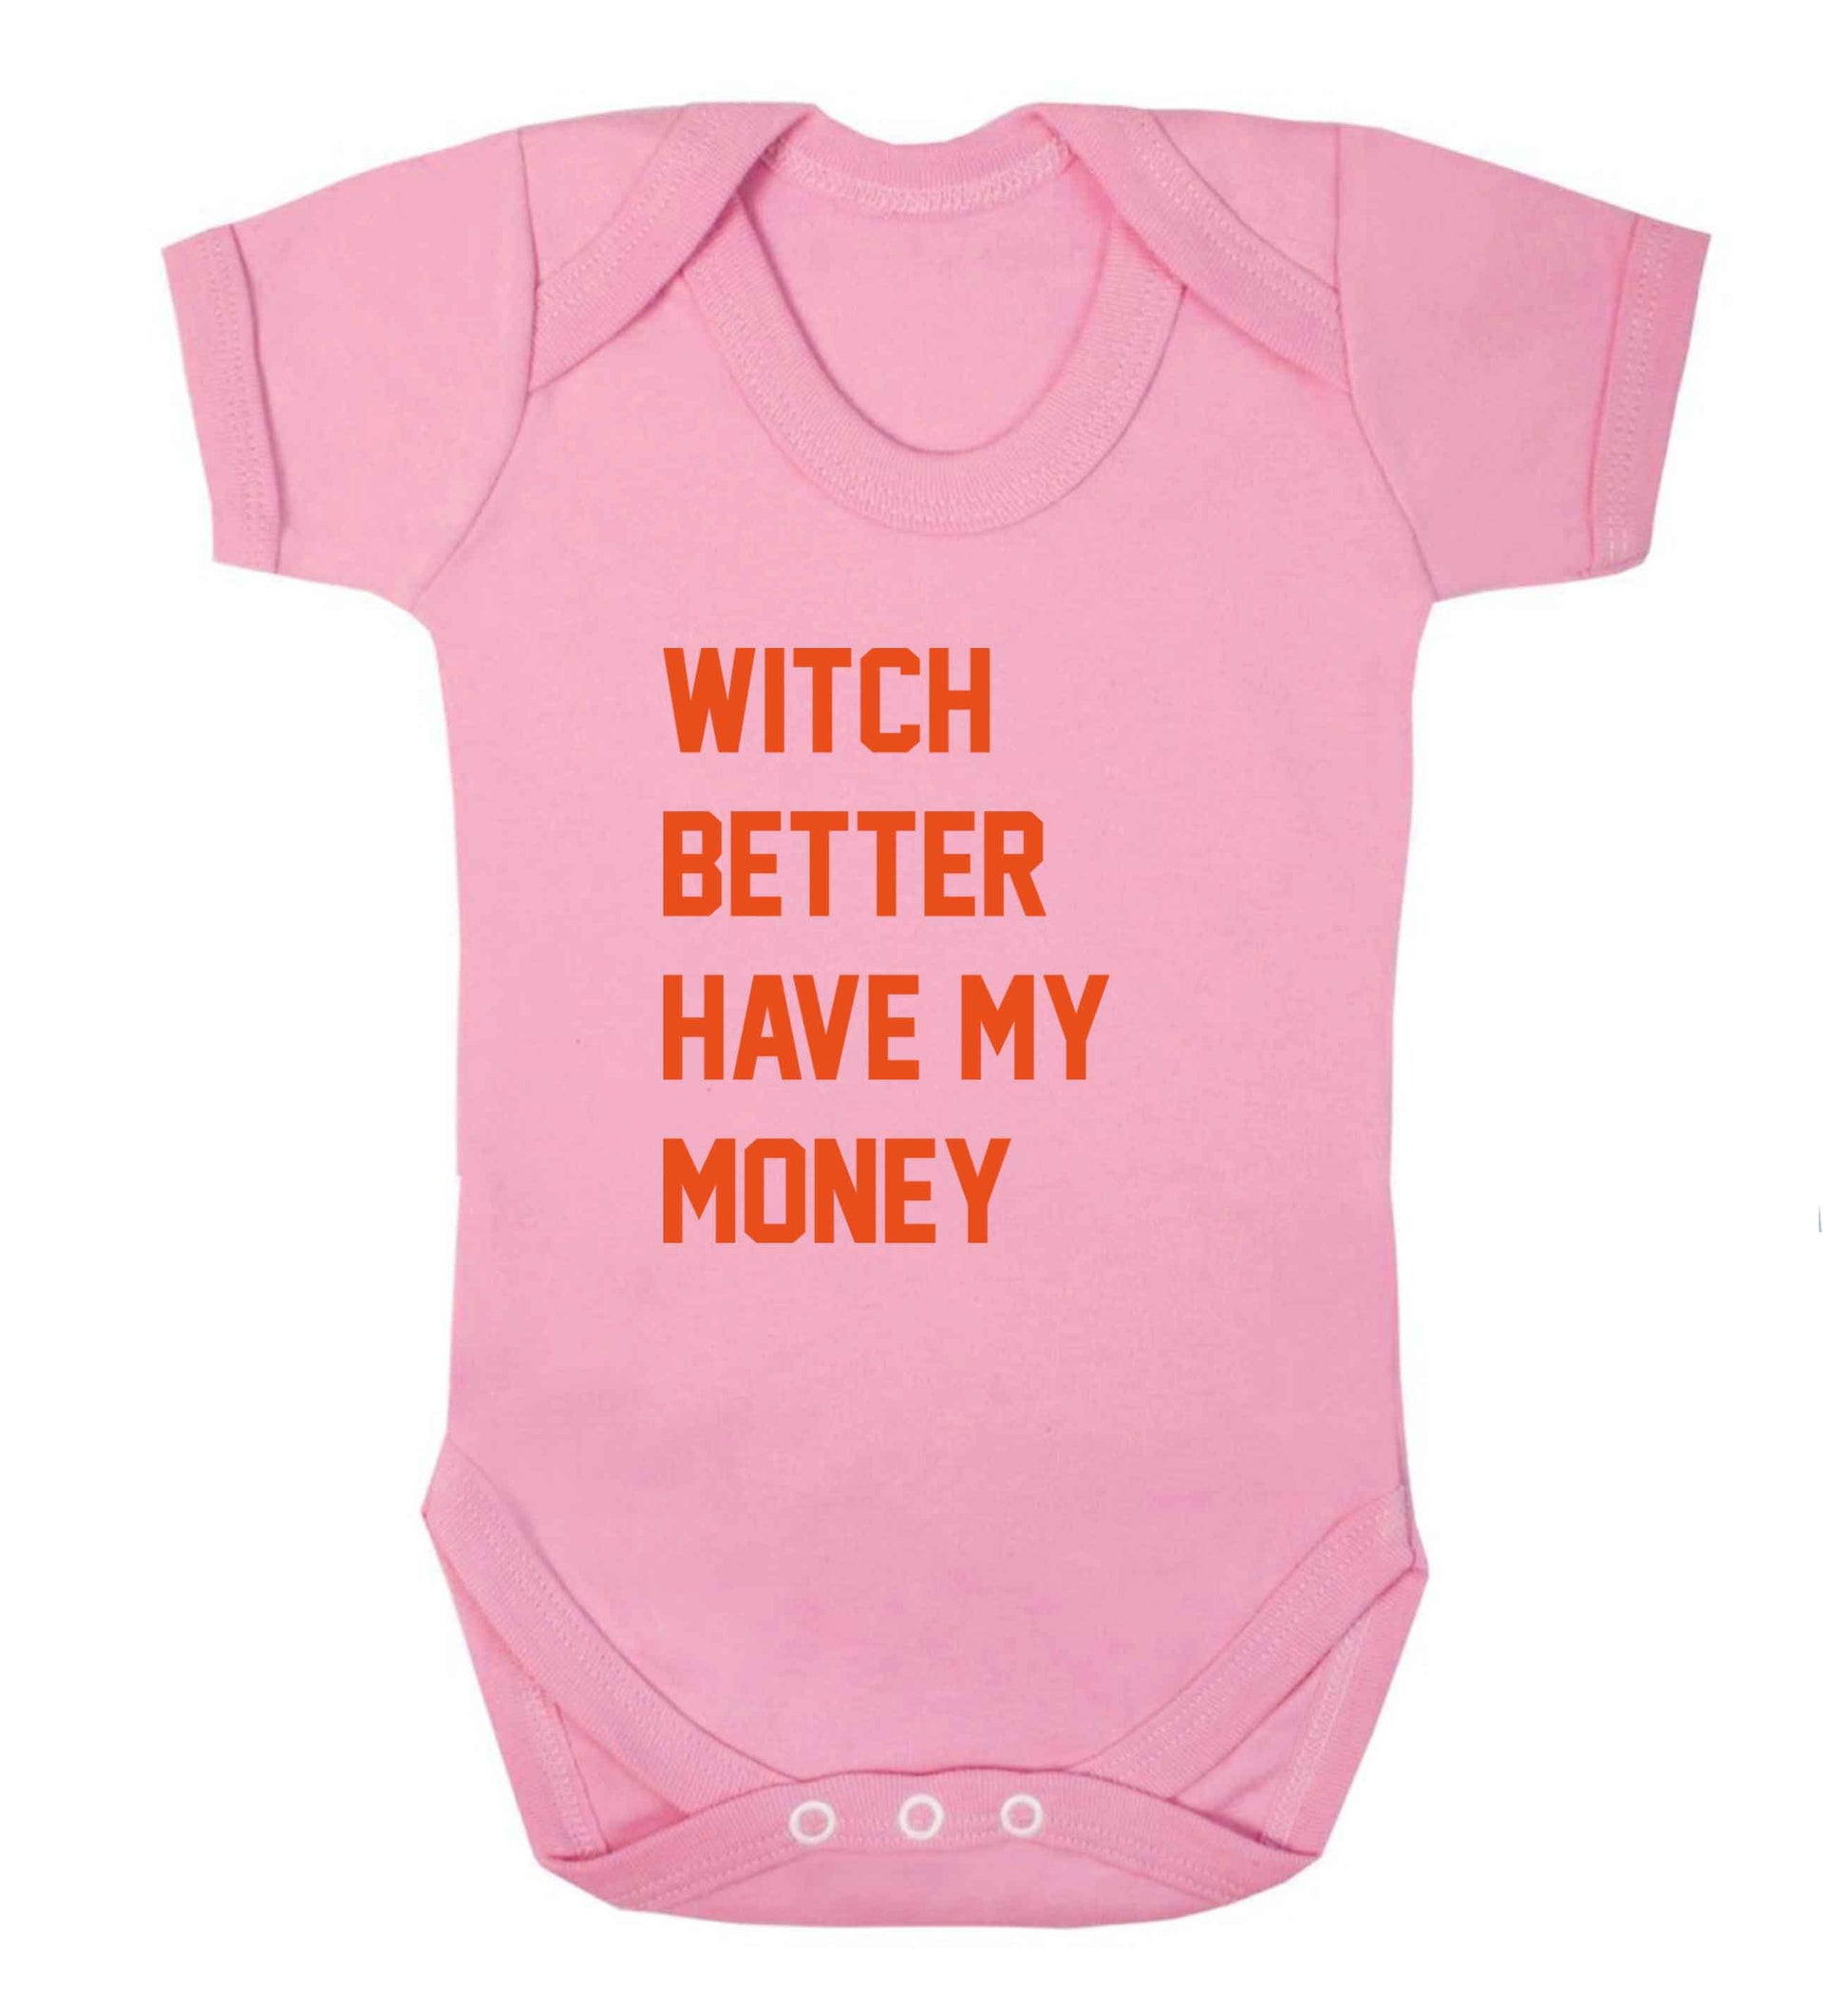 Witch better have my money baby vest pale pink 18-24 months